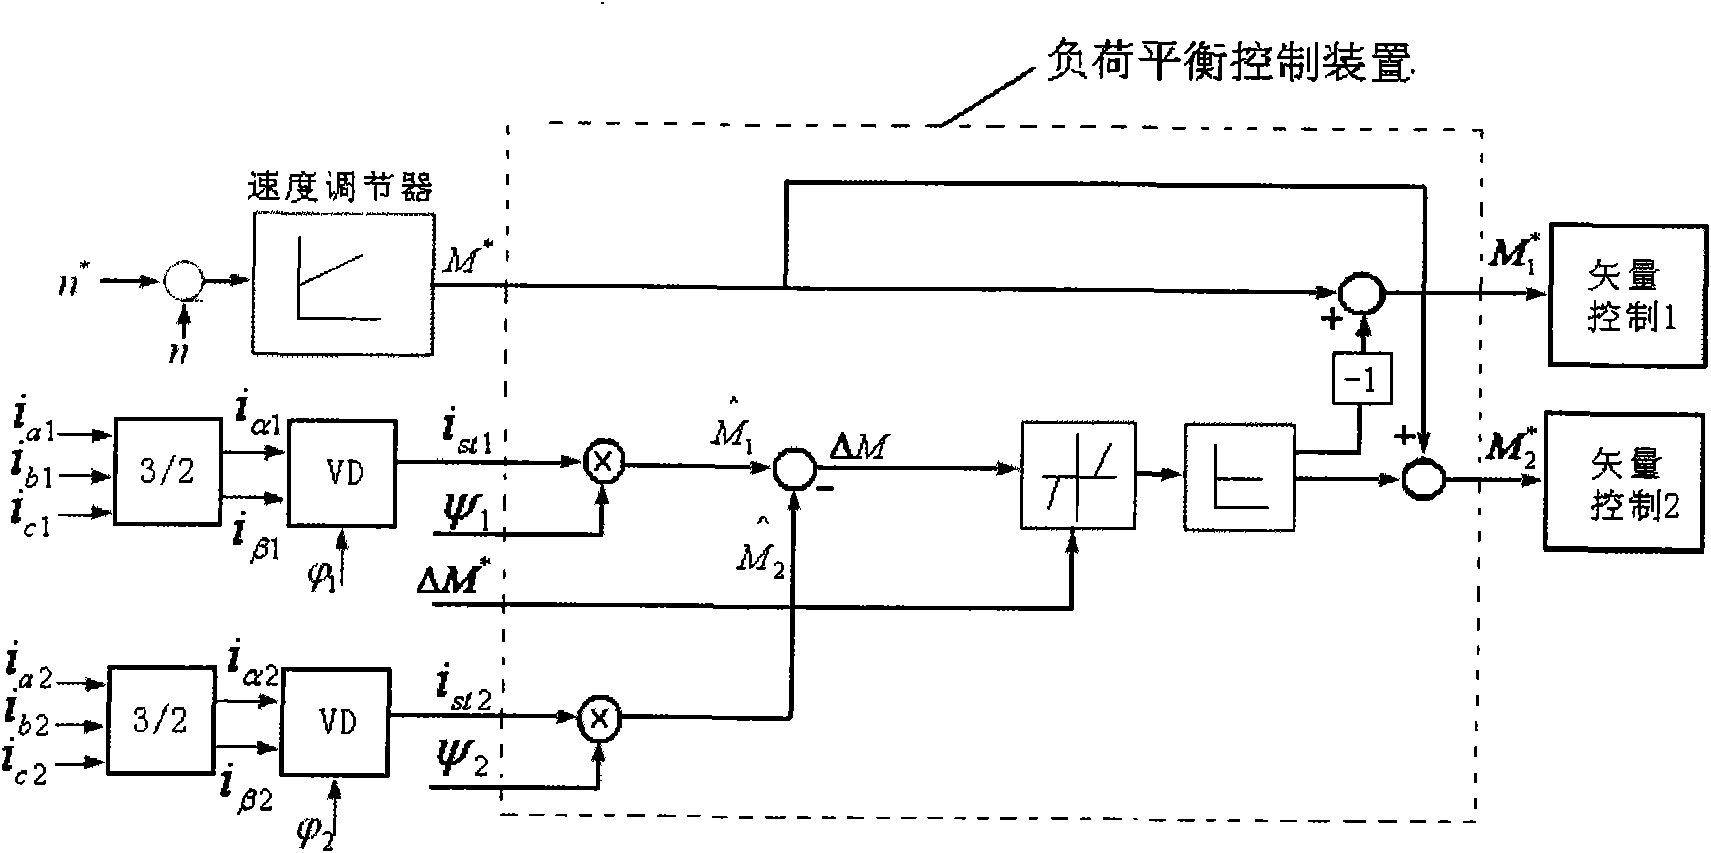 Synchronous and load balancing control system for series operation of a plurality of alternating-current synchronous motors